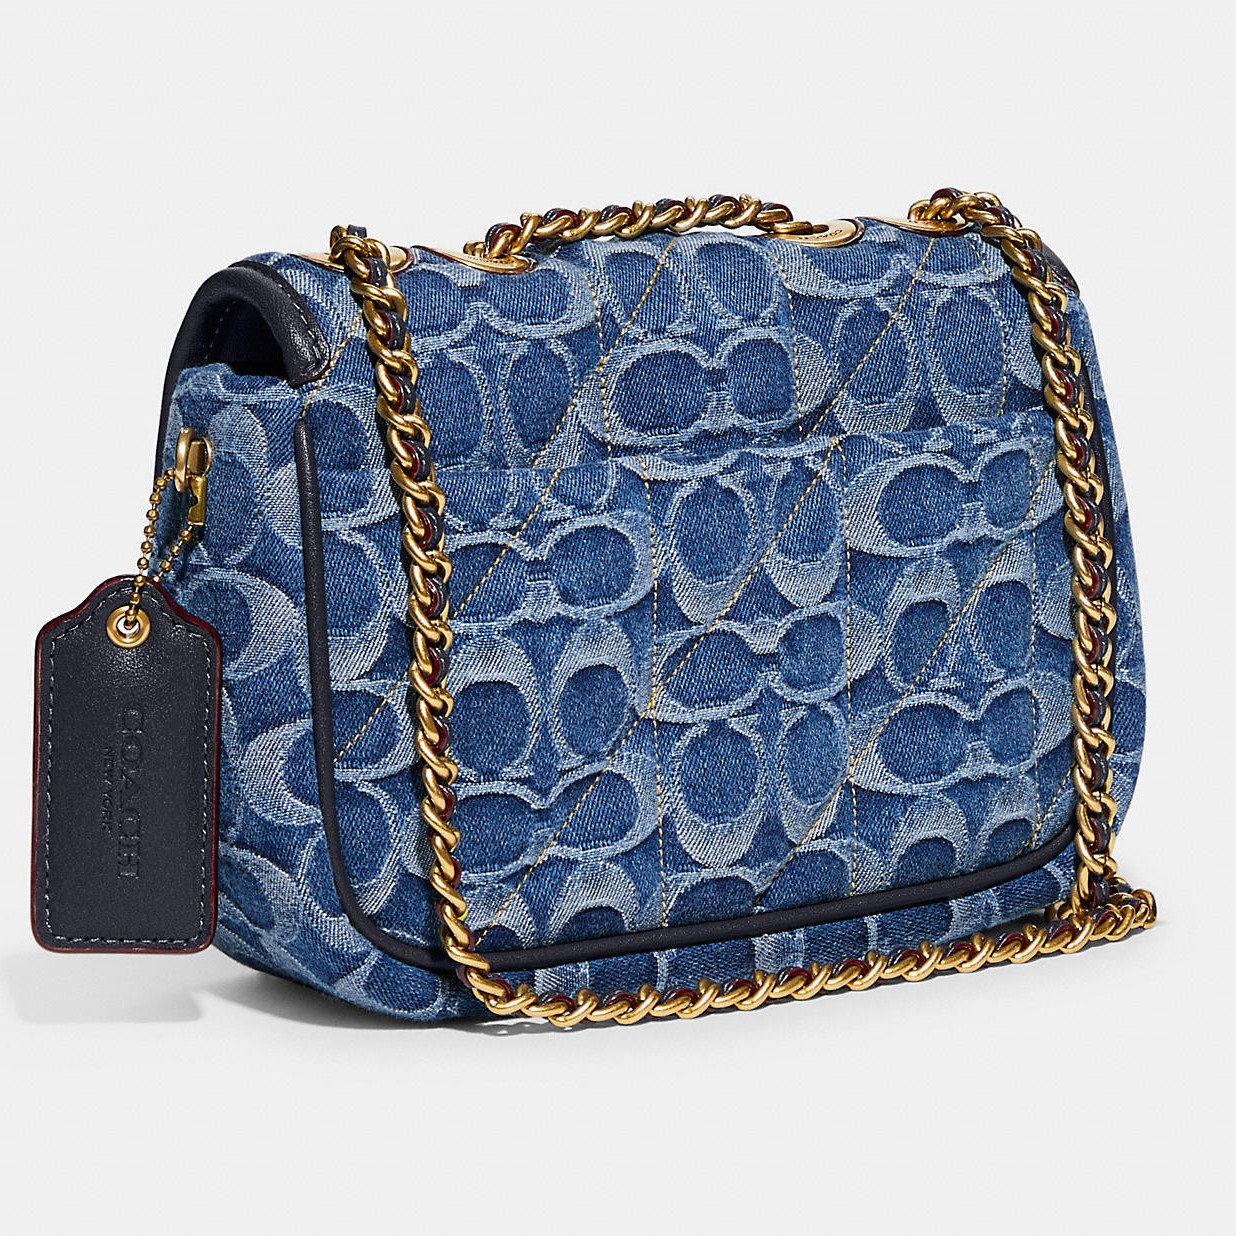 TÚI ĐEO CHÉO COACH PILLOW MADISON SHOULDER BAG 18 IN SIGNAUTURE DENIM WITH QUILTING 2